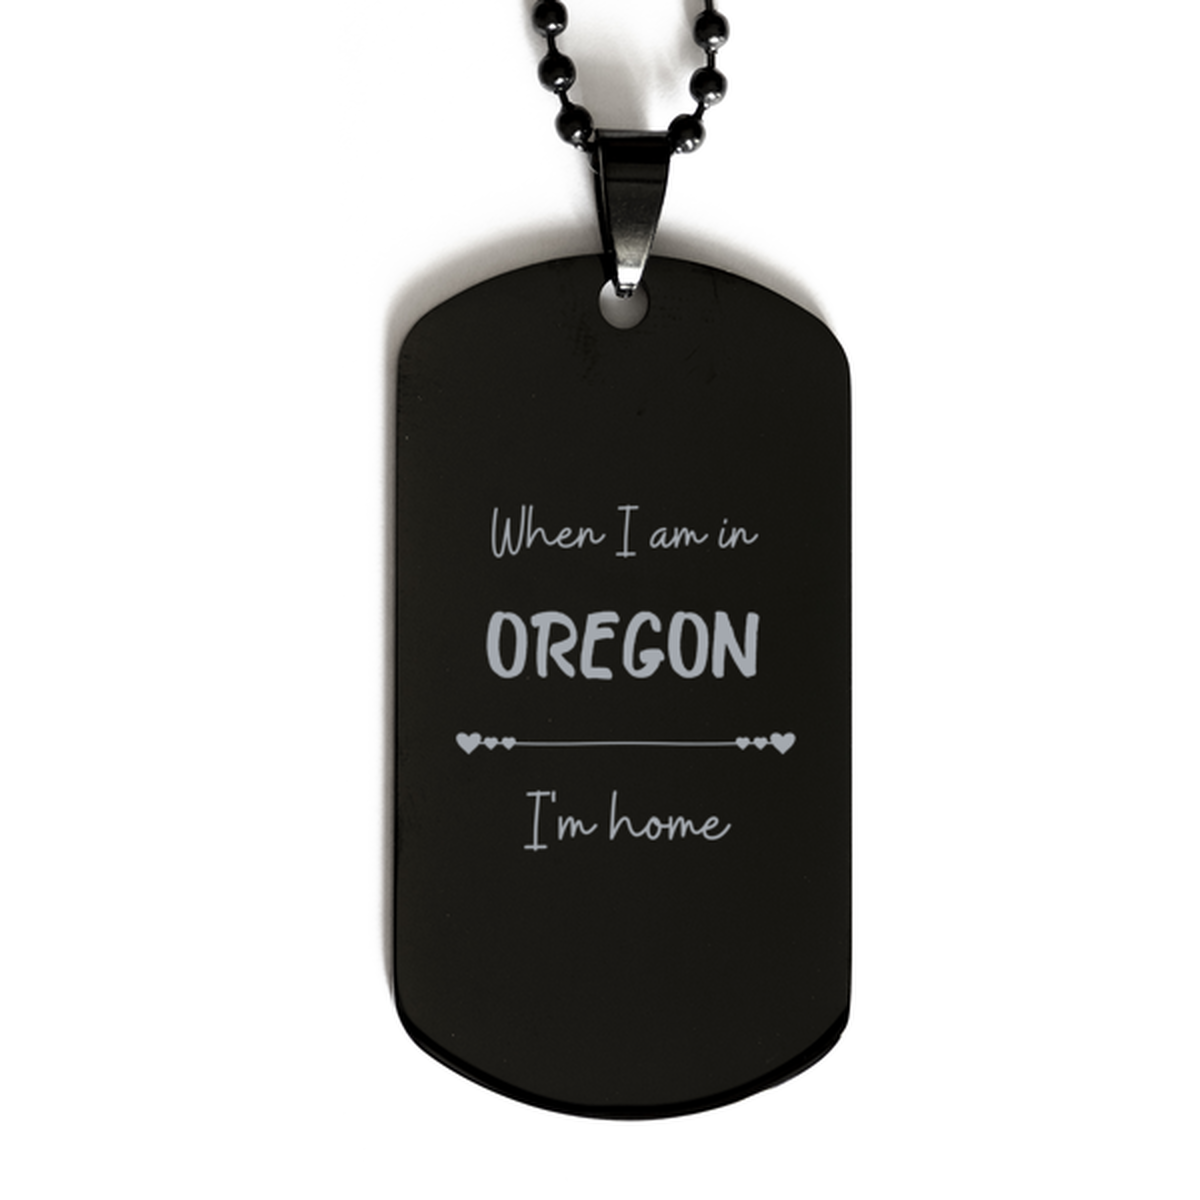 When I am in Oregon I'm home Black Dog Tag, Cheap Gifts For Oregon, State Oregon Birthday Gifts for Friends Coworker